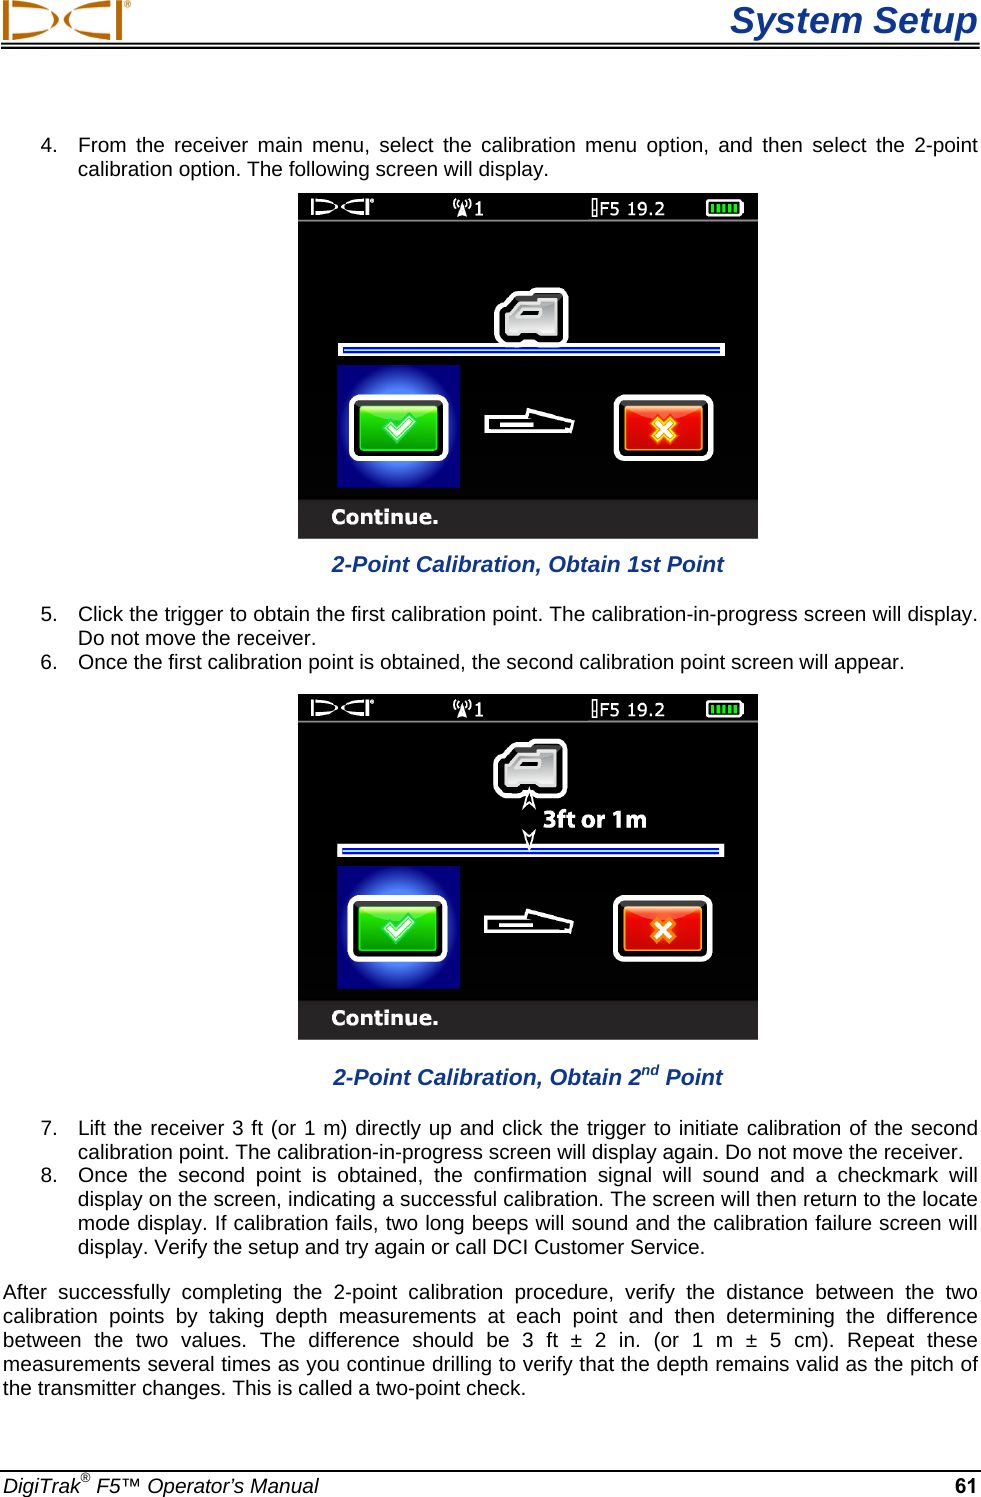  System Setup DigiTrak® F5™ Operator’s Manual 61 4.  From the receiver main menu, select the calibration menu option, and then select the 2-point calibration option. The following screen will display.  2-Point Calibration, Obtain 1st Point 5.  Click the trigger to obtain the first calibration point. The calibration-in-progress screen will display. Do not move the receiver. 6.  Once the first calibration point is obtained, the second calibration point screen will appear.  2-Point Calibration, Obtain 2nd Point 7.  Lift the receiver 3 ft (or 1 m) directly up and click the trigger to initiate calibration of the second calibration point. The calibration-in-progress screen will display again. Do not move the receiver. 8.  Once the second point is obtained, the confirmation signal will sound and a checkmark will display on the screen, indicating a successful calibration. The screen will then return to the locate mode display. If calibration fails, two long beeps will sound and the calibration failure screen will display. Verify the setup and try again or call DCI Customer Service. After successfully completing the 2-point calibration procedure, verify the distance between the two calibration points by taking depth measurements at each point and then determining the difference between the two values. The difference should be 3 ft ± 2 in. (or 1 m ± 5 cm). Repeat these measurements several times as you continue drilling to verify that the depth remains valid as the pitch of the transmitter changes. This is called a two-point check. 